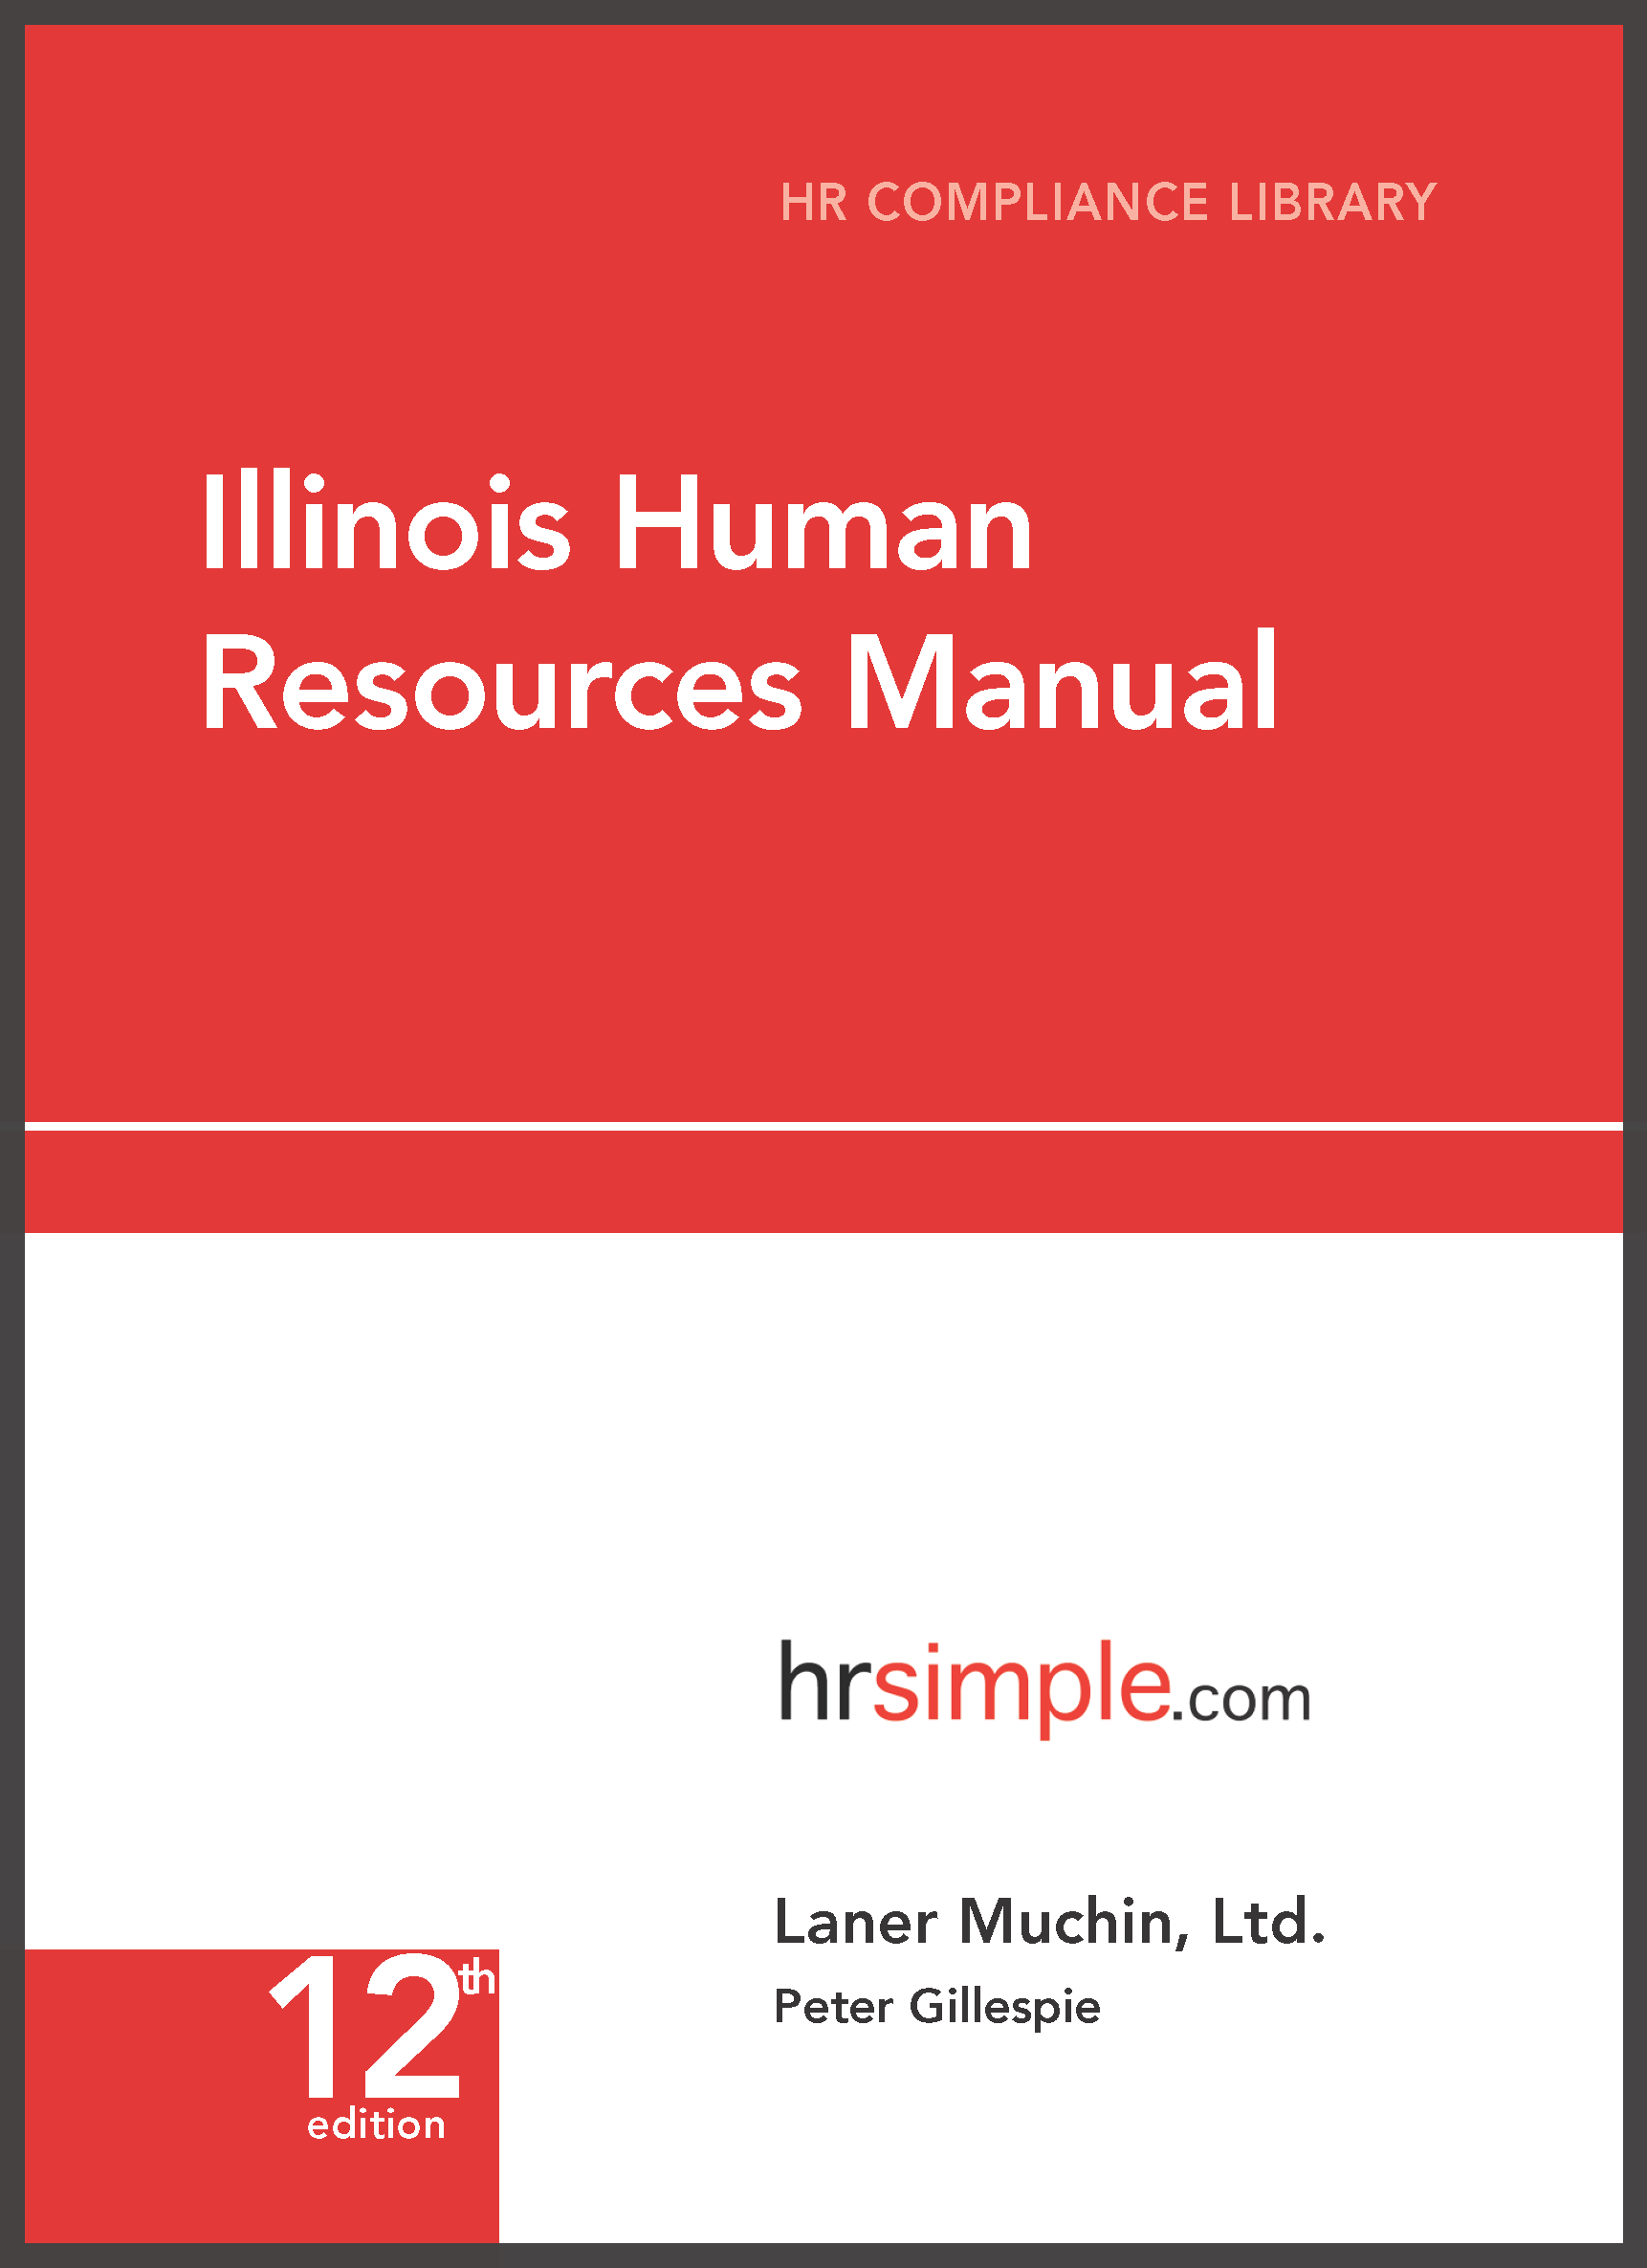 Illinois Human Resources Library—Online Only employment law image, remote work, labor laws, employment laws, right to work, order of protection, minimum wage